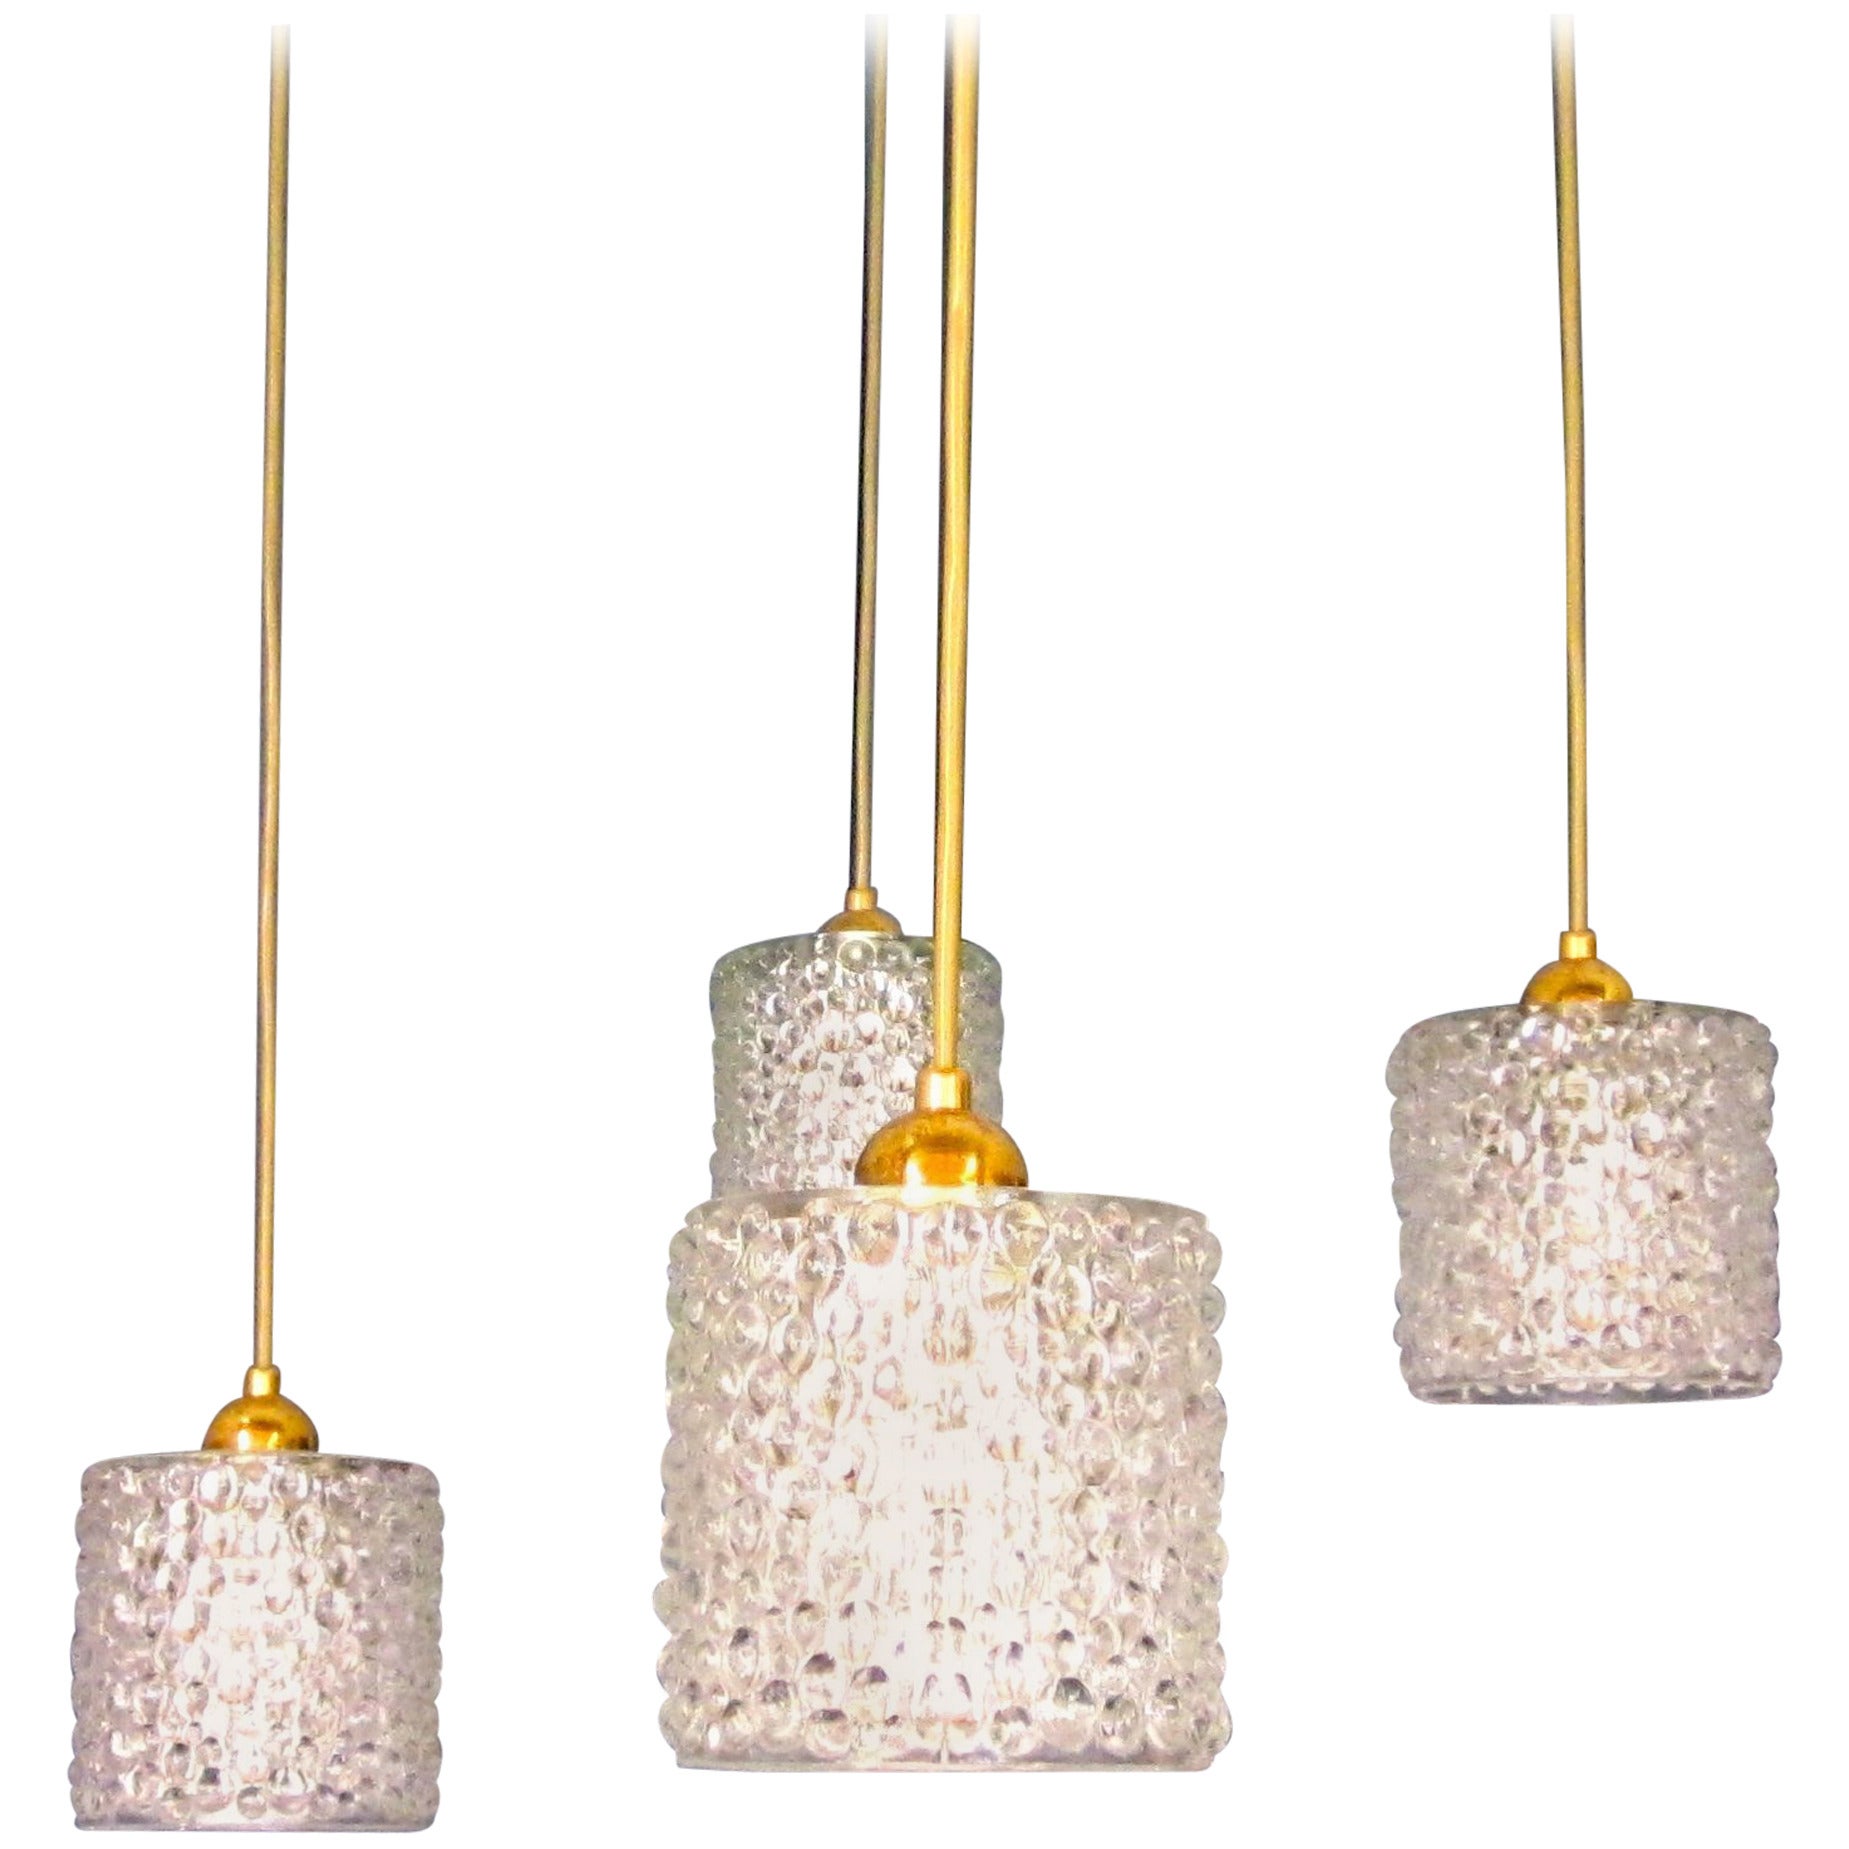 1960s Crystal Textured Pendant Lamps, Set of Four, Italy